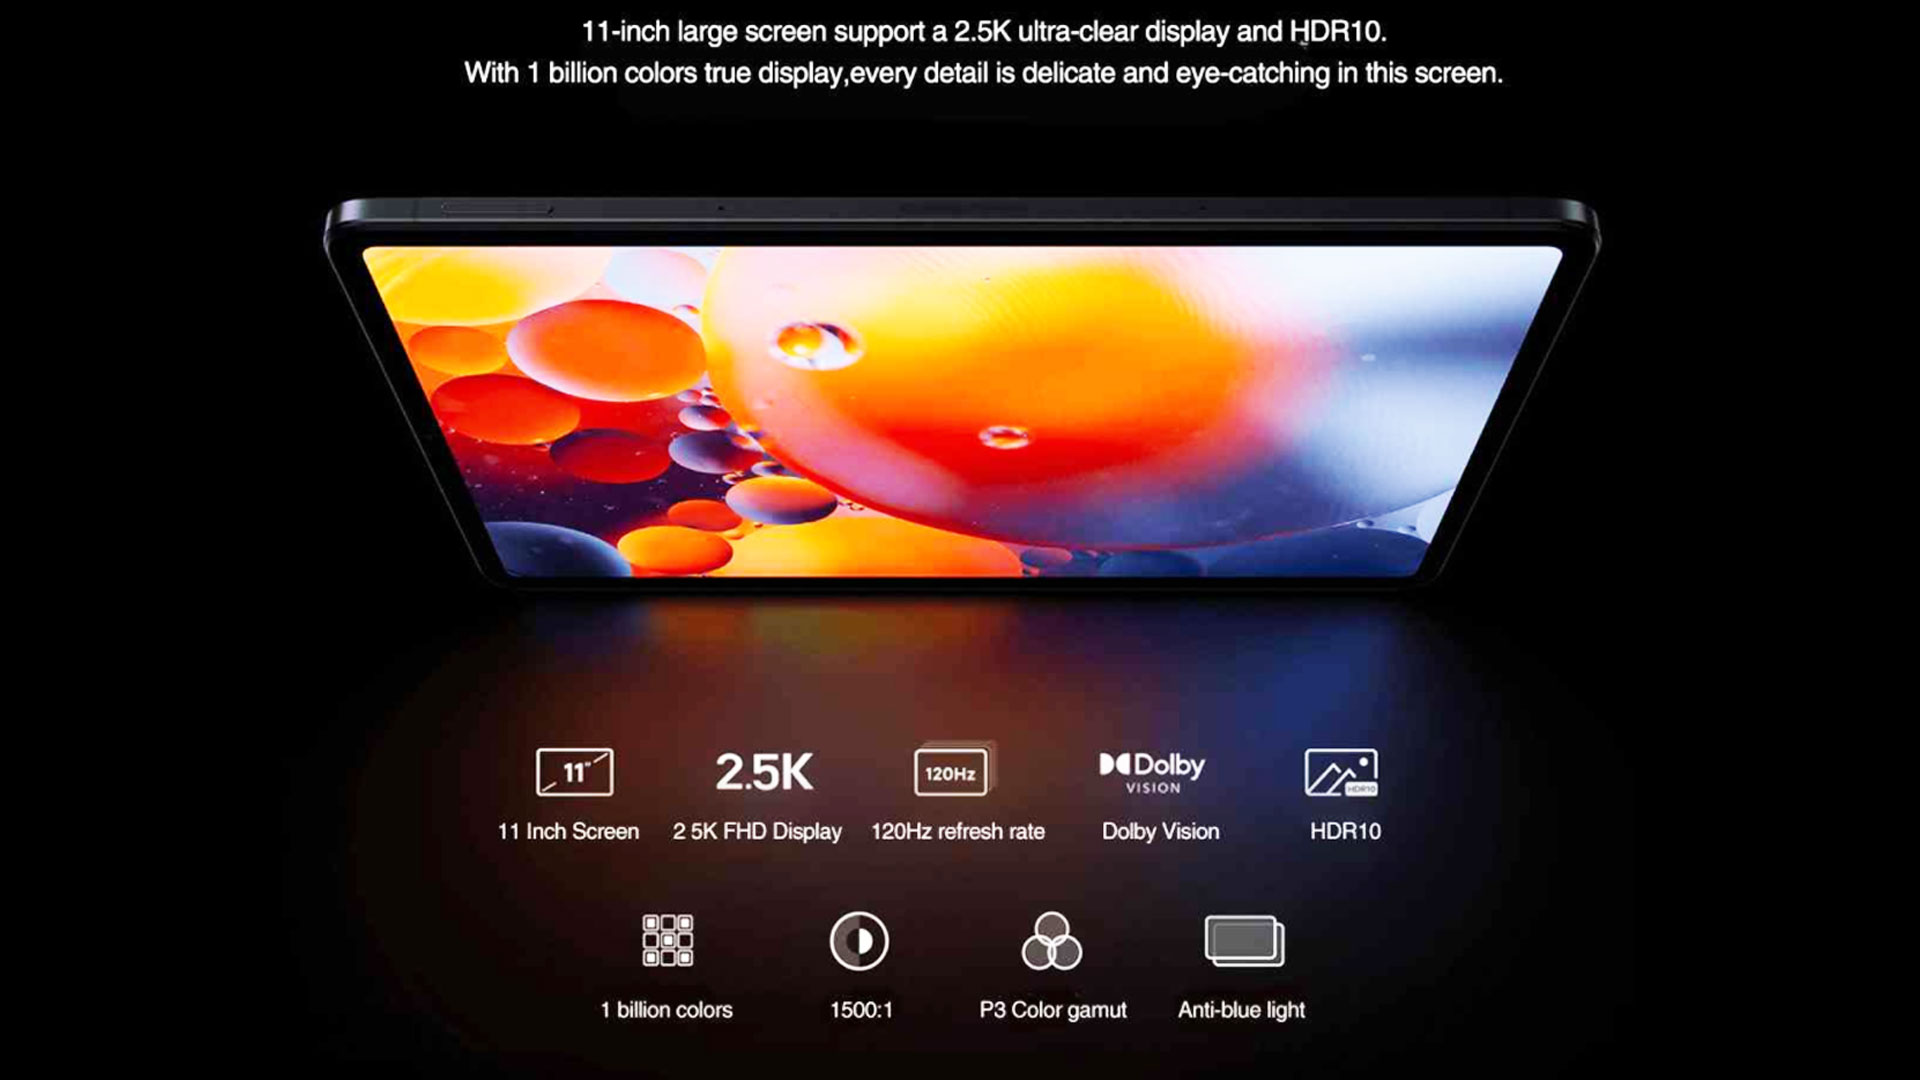 XIAOMI Pad 5 Pro Xiaomi MI Pad 5 Pro XIAOMI Pad 5 Xiaomi tablet Android tablet tablet PC